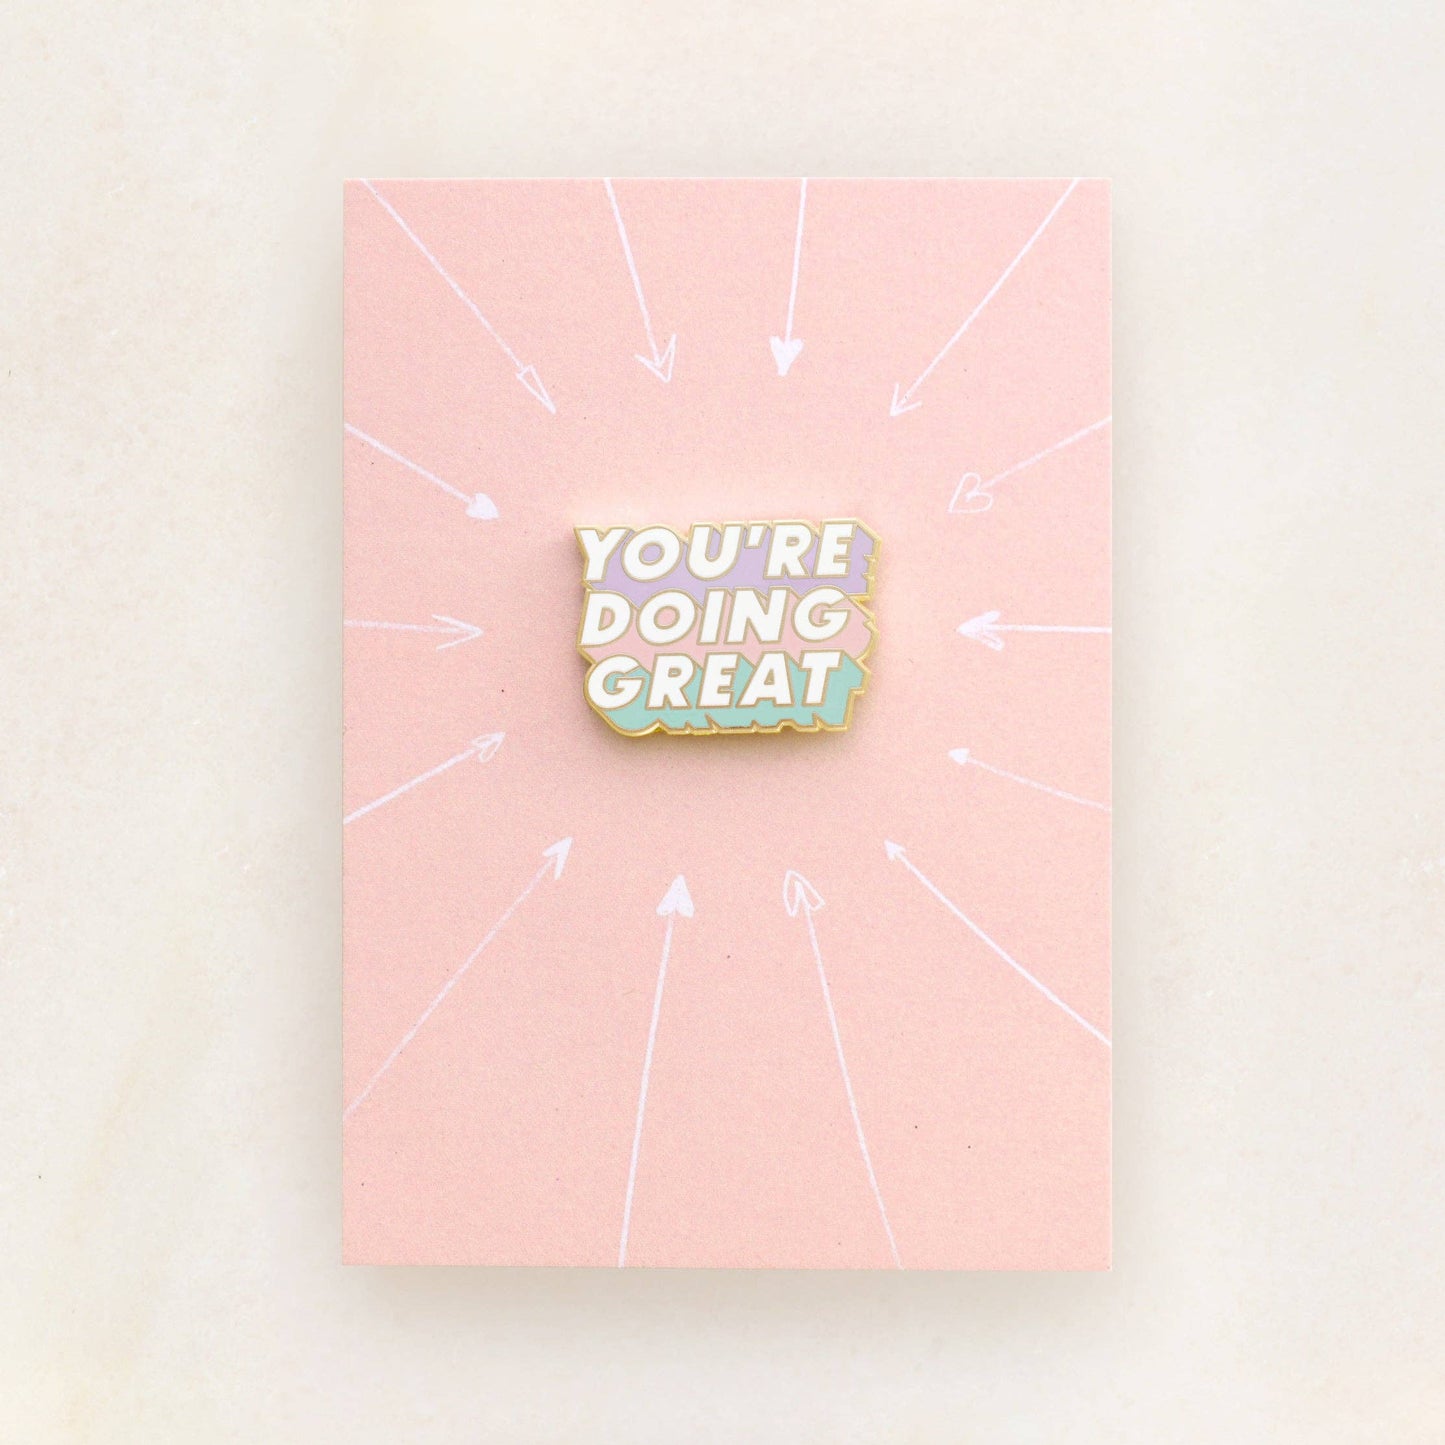 You're doing great positive pin badge